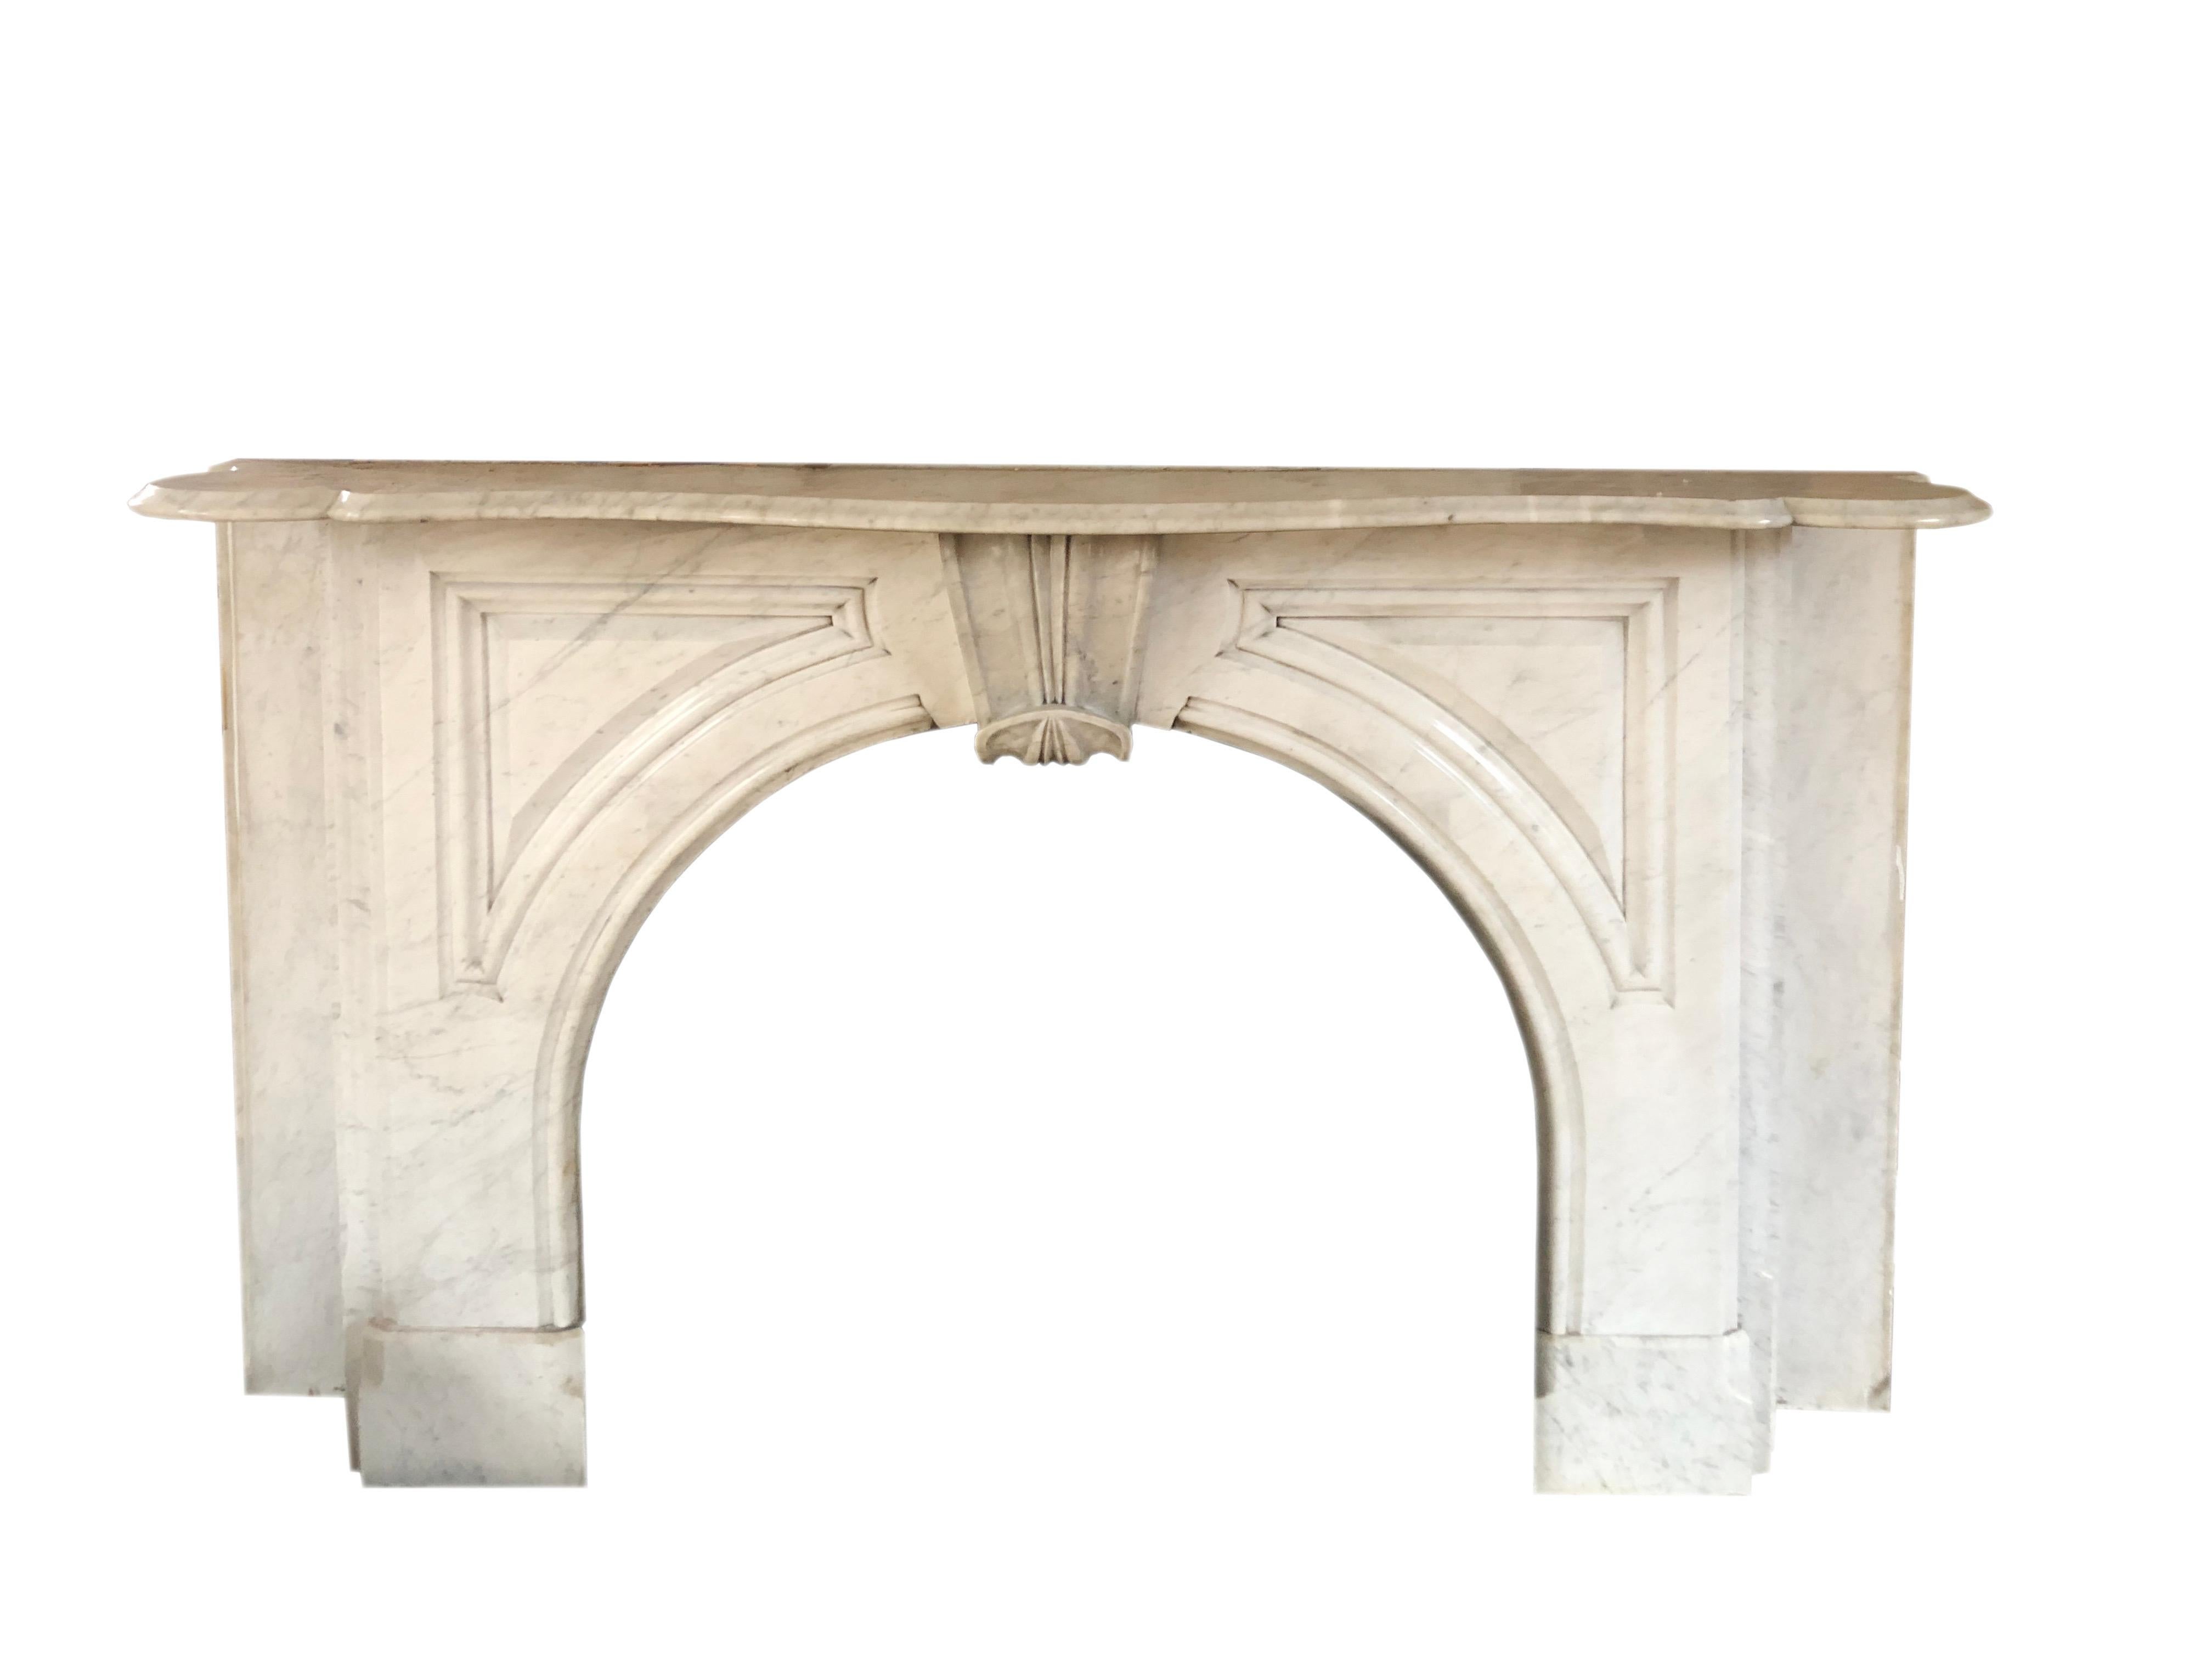 19th Century Victorian Arched Carrara Marble Mantel, Crated for Shipment 6